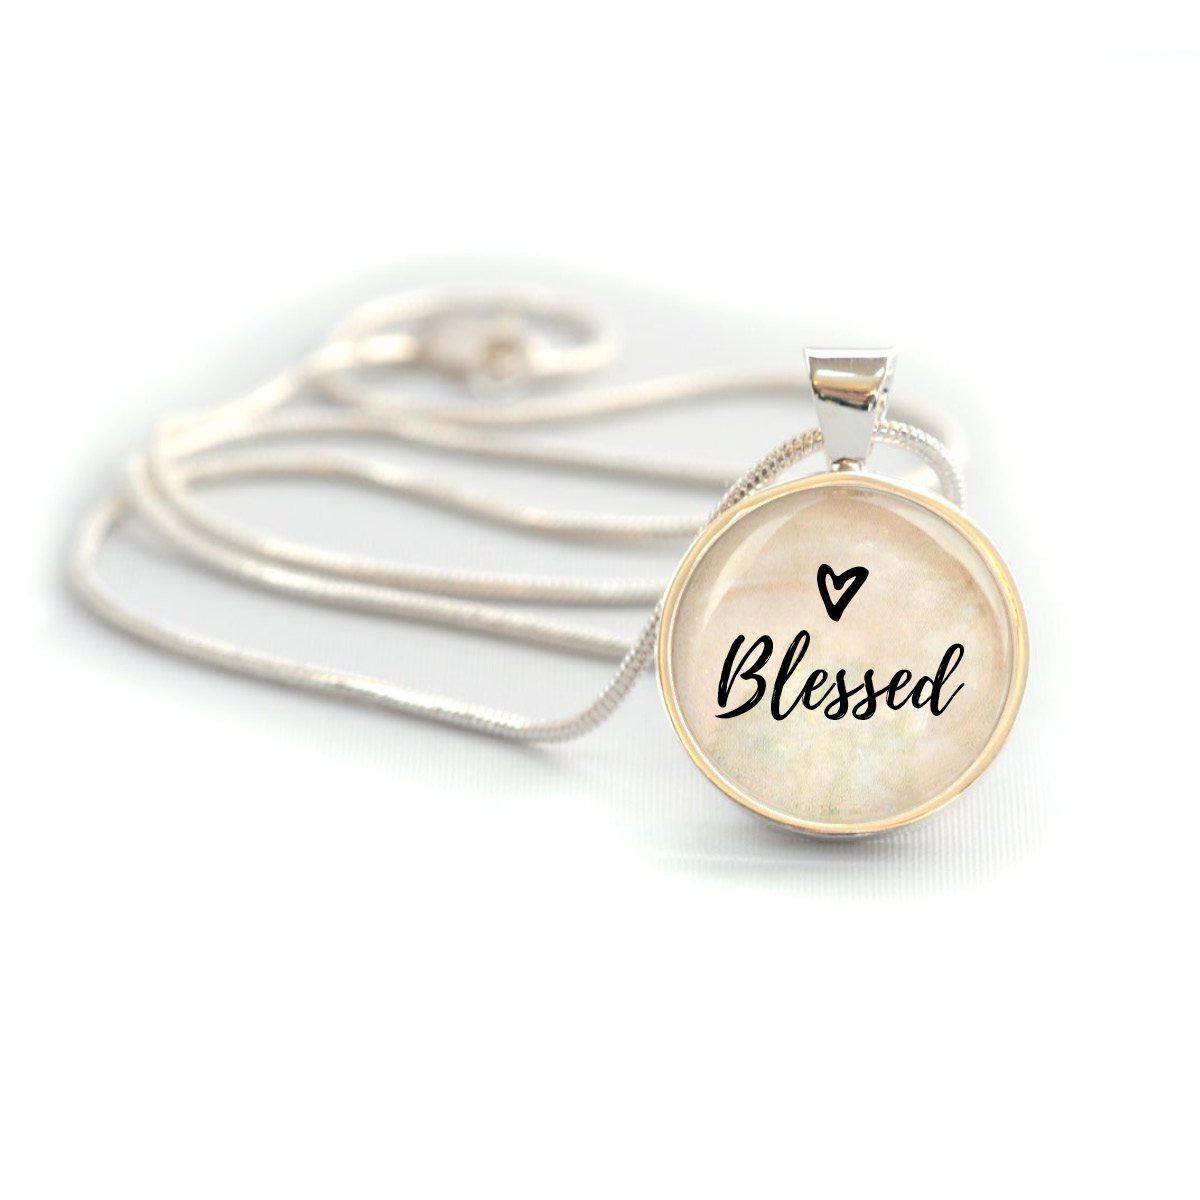 Blessed Silver-Plated Pendant Necklace - Handcrafted, 20" Chain, Heart Illustration, Nickel-Free Bijou Her